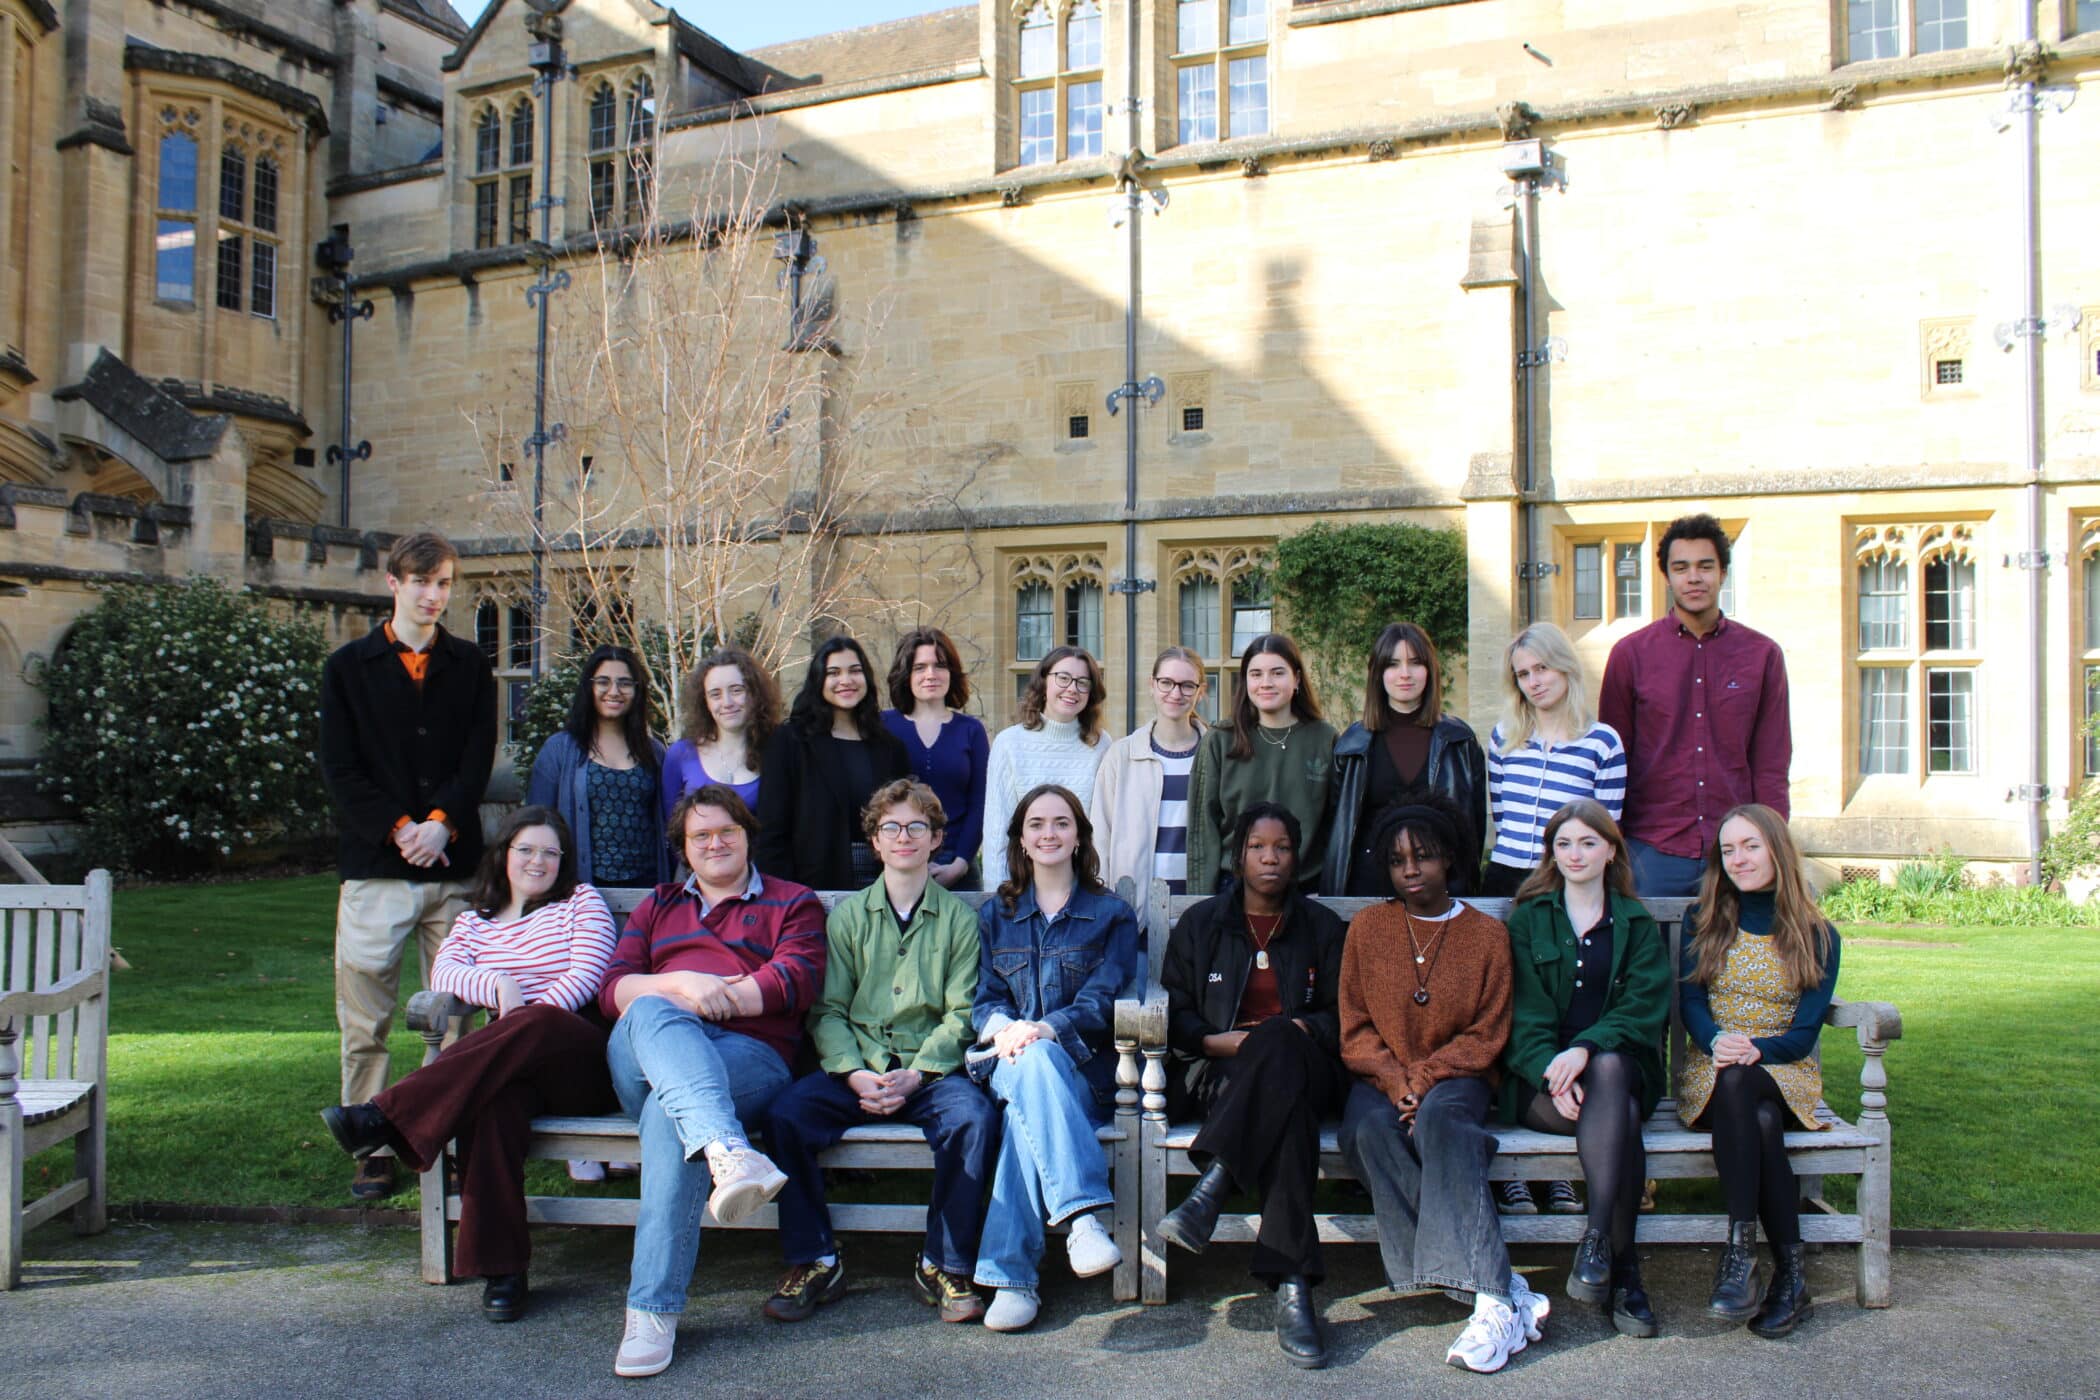 Group photo of students, some sat on the bench and some standing behind